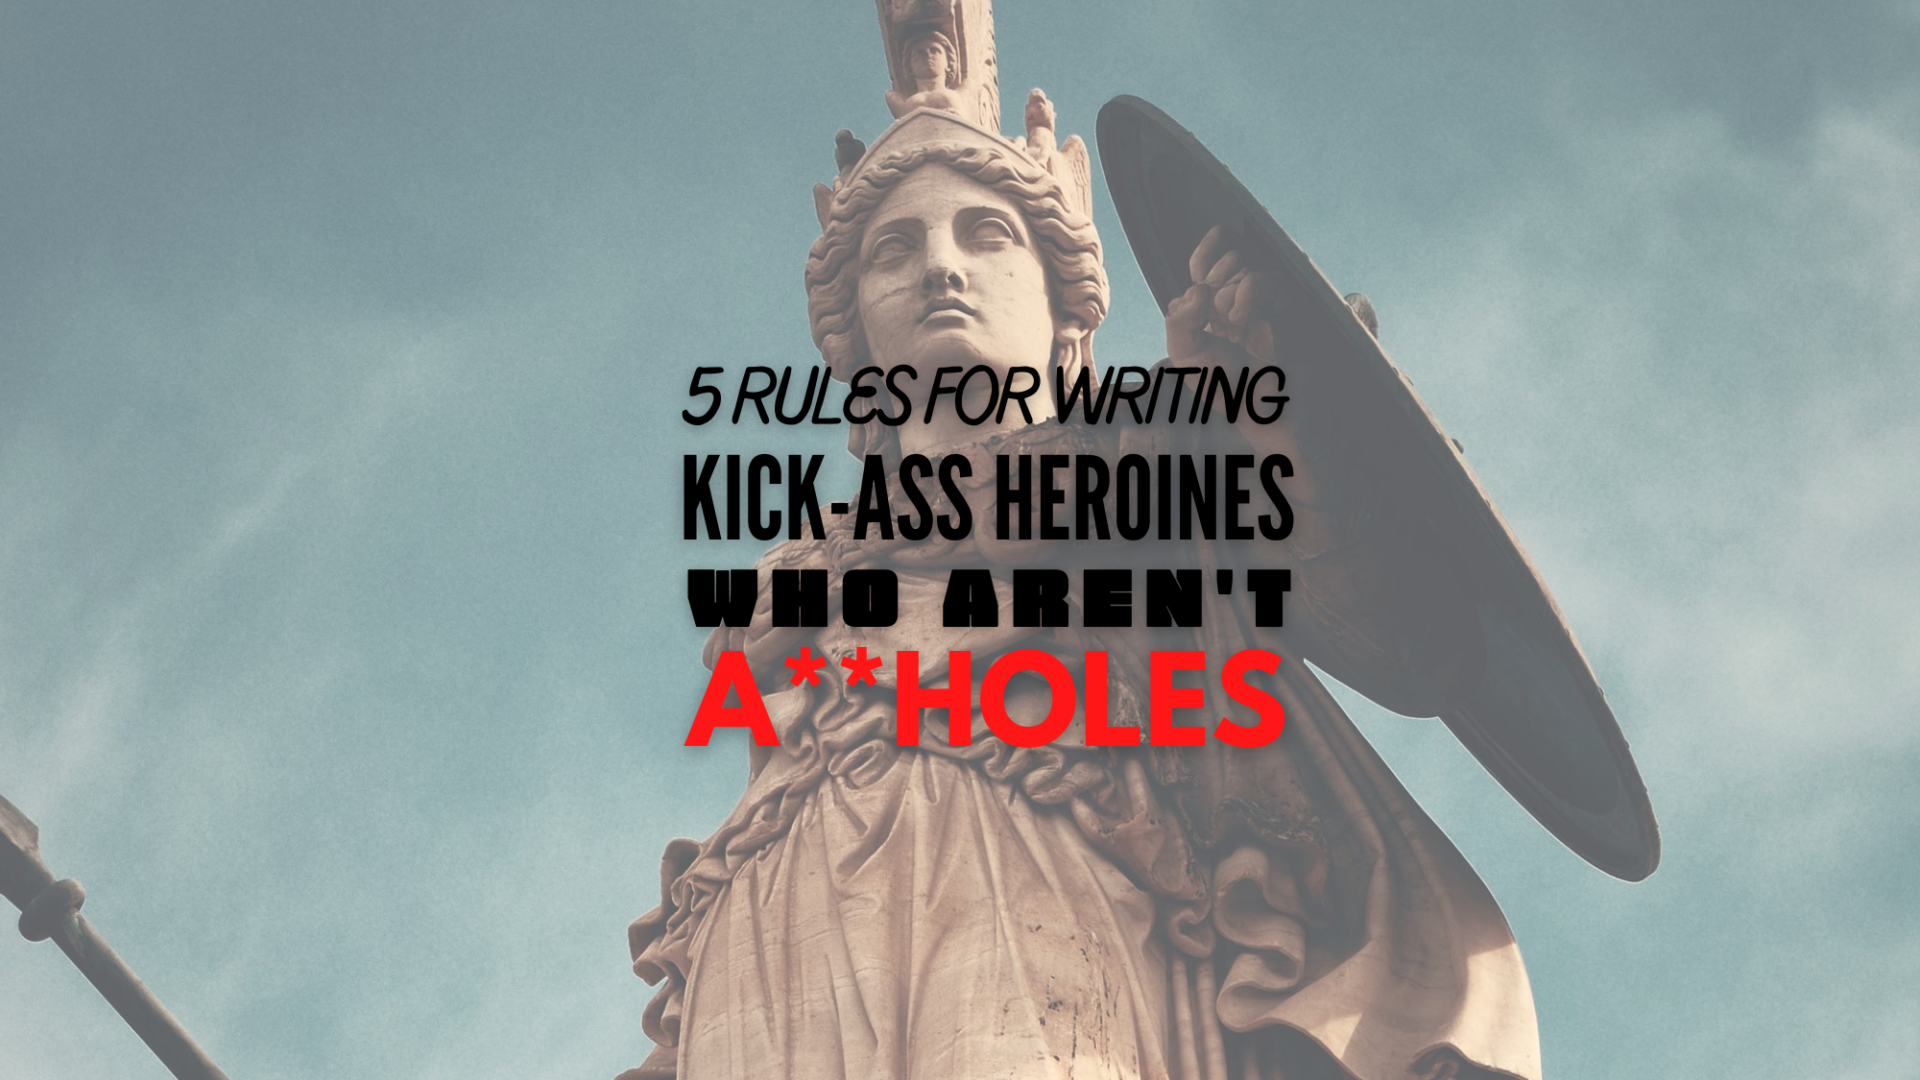 My Rules for Writing Kick-Ass Heroines